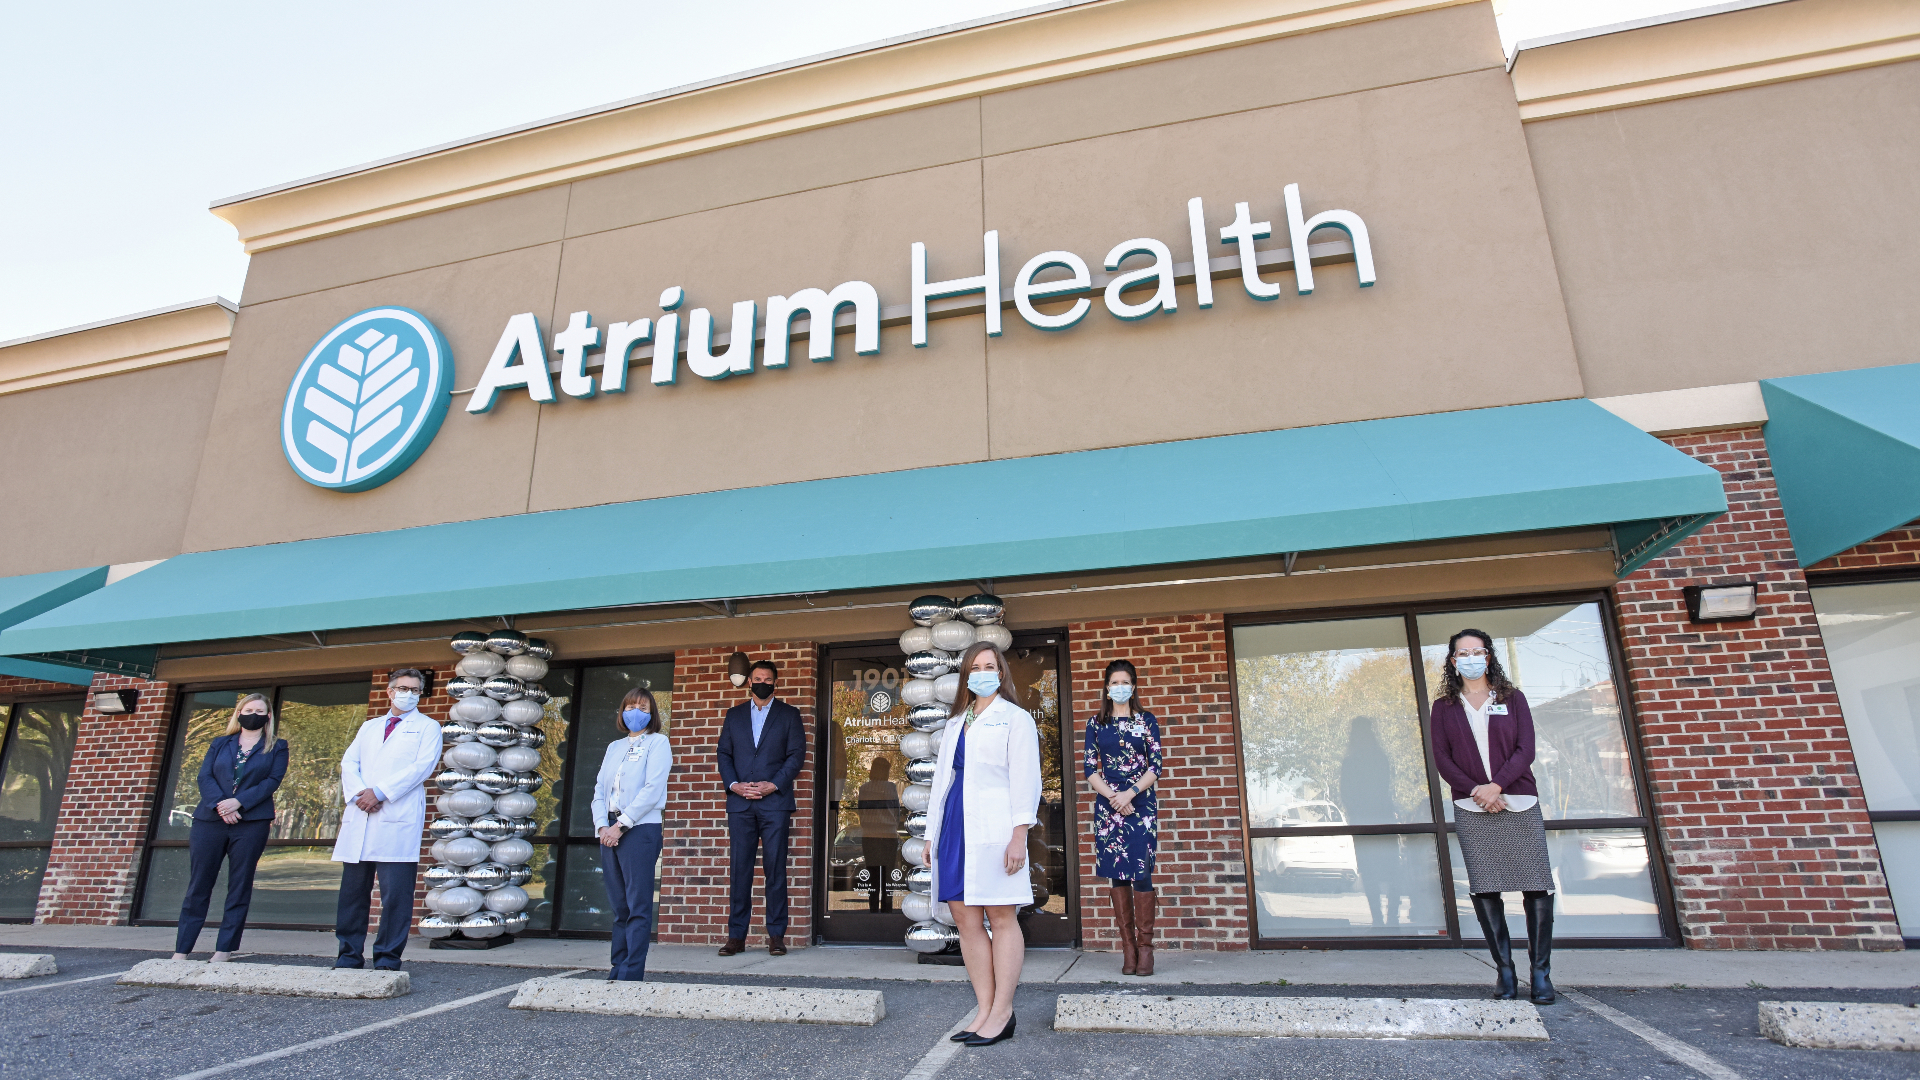 Atrium Health Women’s Care is committed to the health and well-being of the residents of Charlotte and announced the opening of its newest OB/GYN location in the South End neighborhood. 